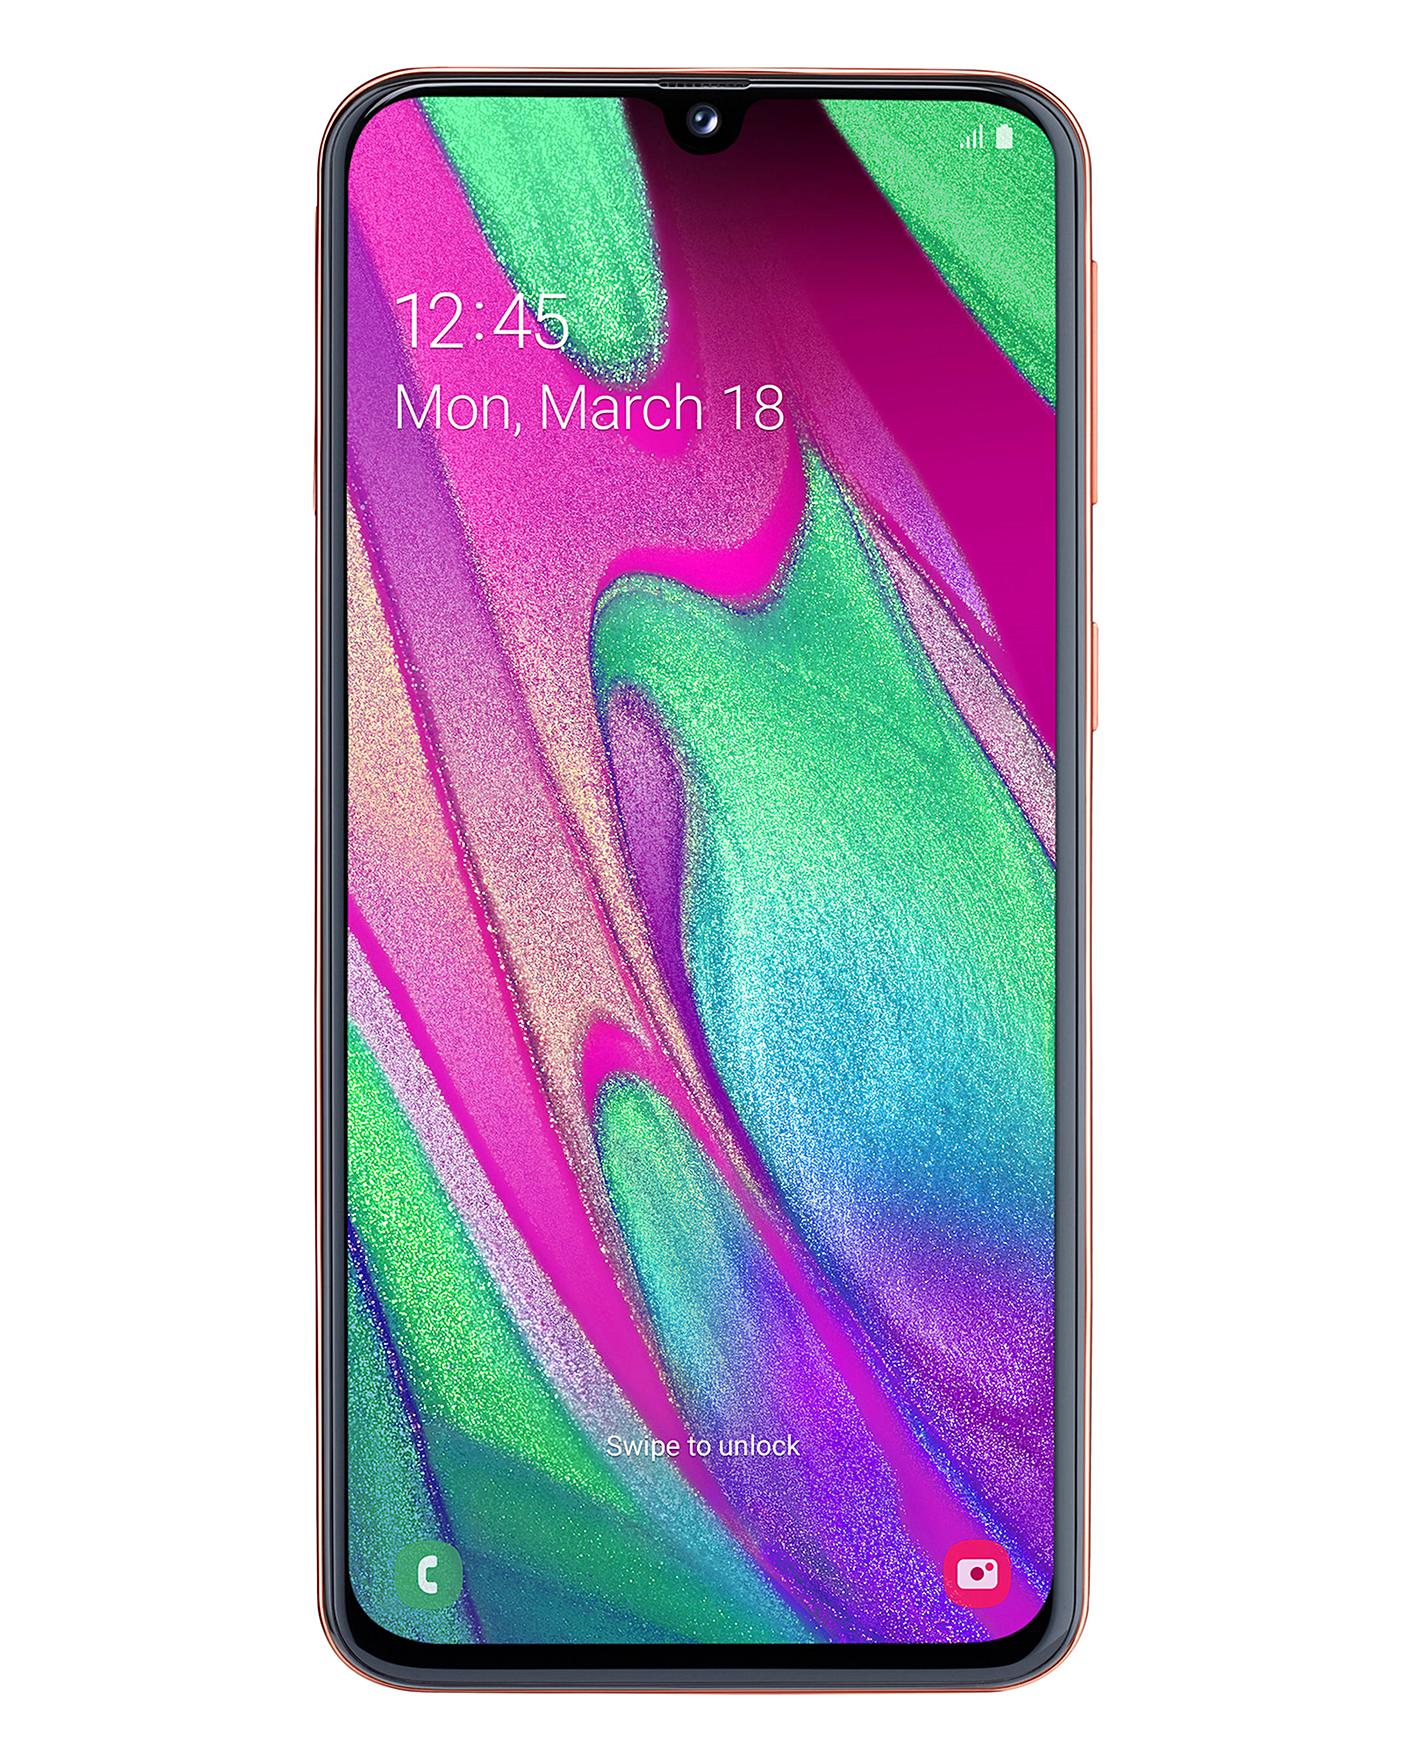 Our best Samsung Galaxy A40 contract deals